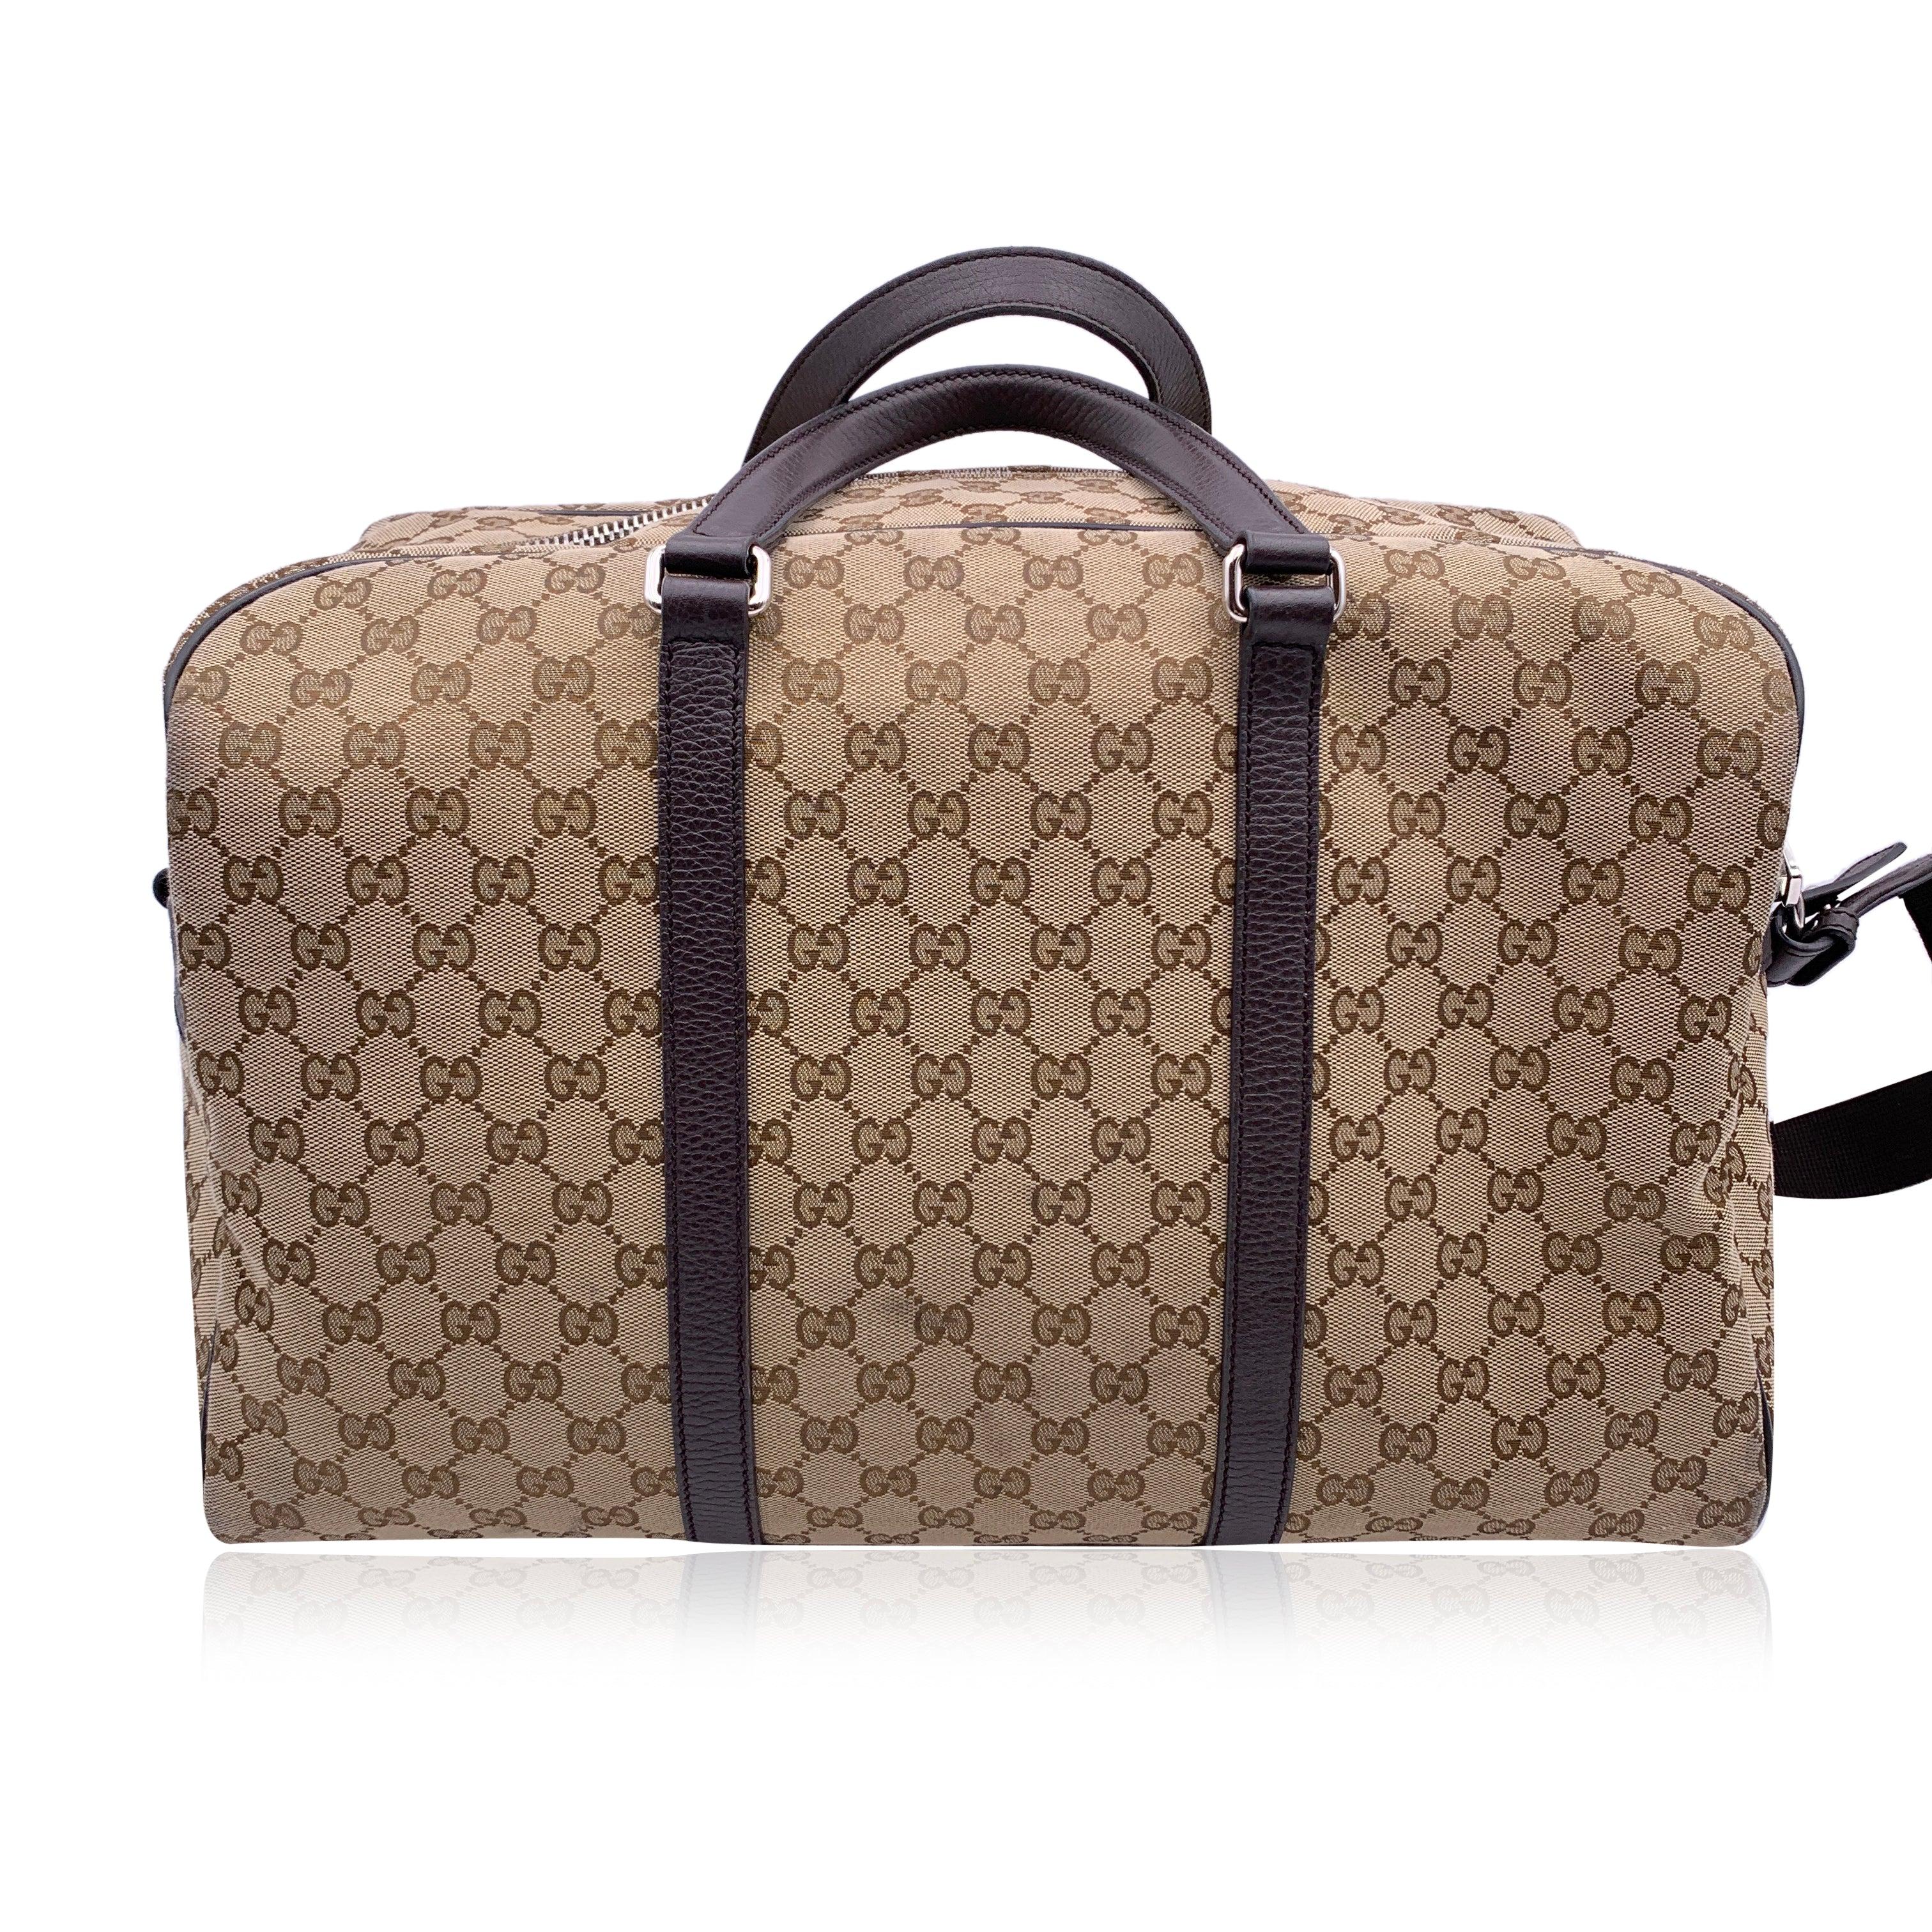 Gucci Beige Monogram Canvas Duffle Weekender Travel Bag with Strap In Good Condition For Sale In Rome, Rome